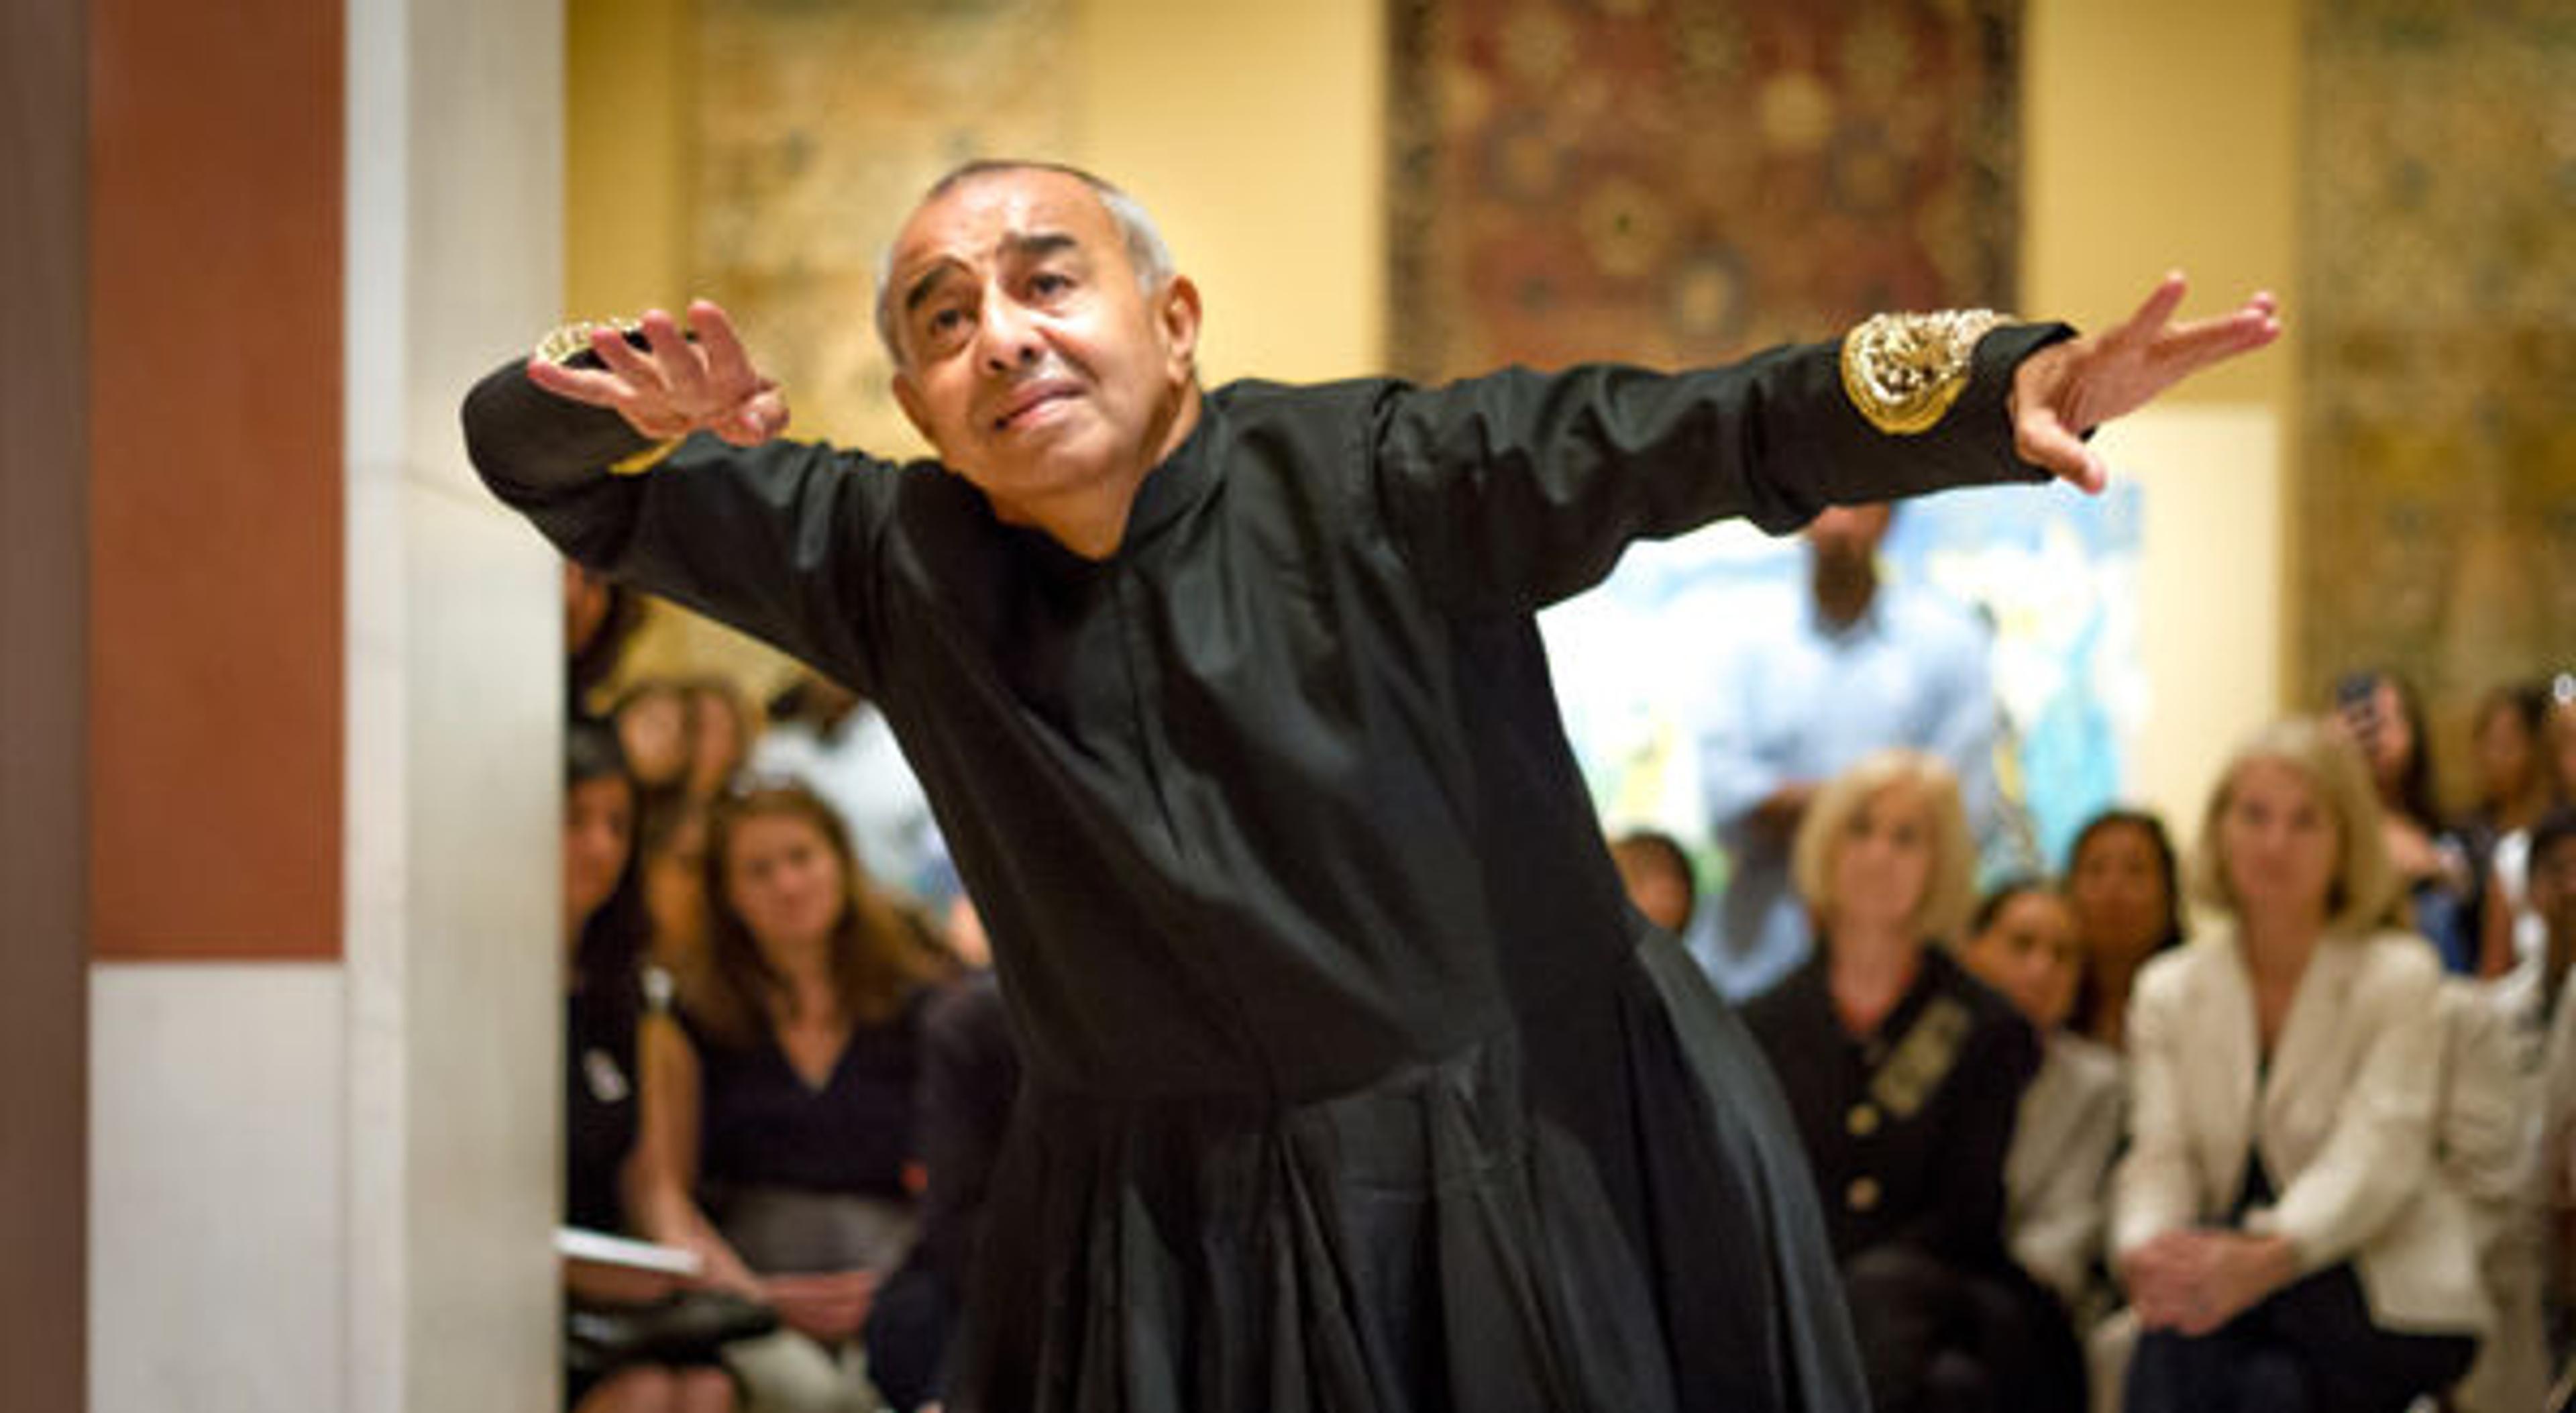 Astad Deboo performs Eternal Embrace in gallery 463 as part of the Moroccan Court Music Series. All photos by Amit Kumar